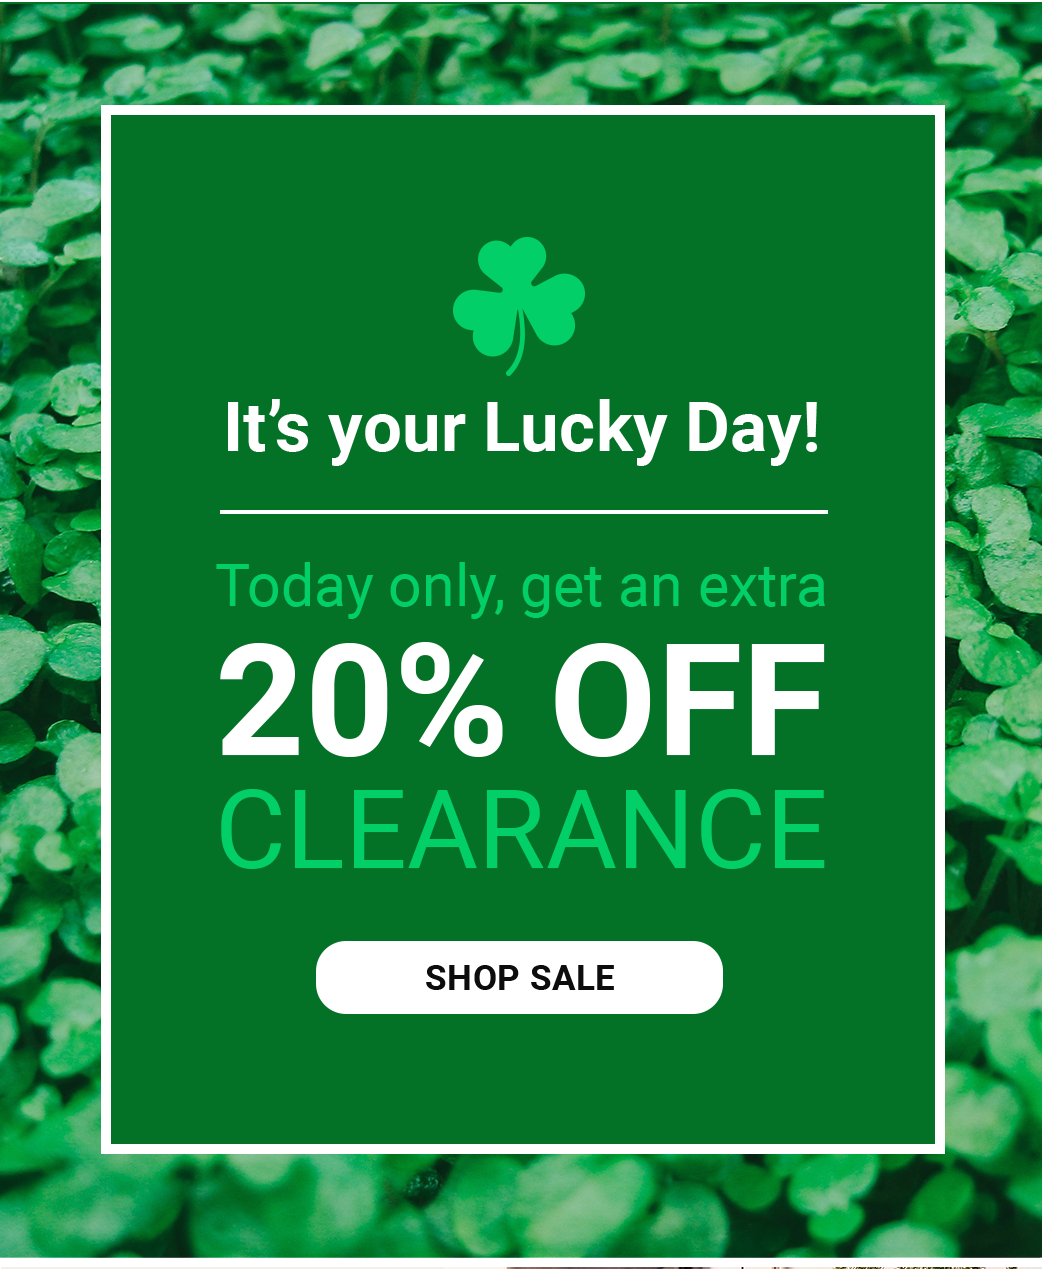 IT'S YOUR LUCKY DAY! TODAY ONLY, GET AN EXTRA 20% OFF CLEARANCE [SHOP SALE]